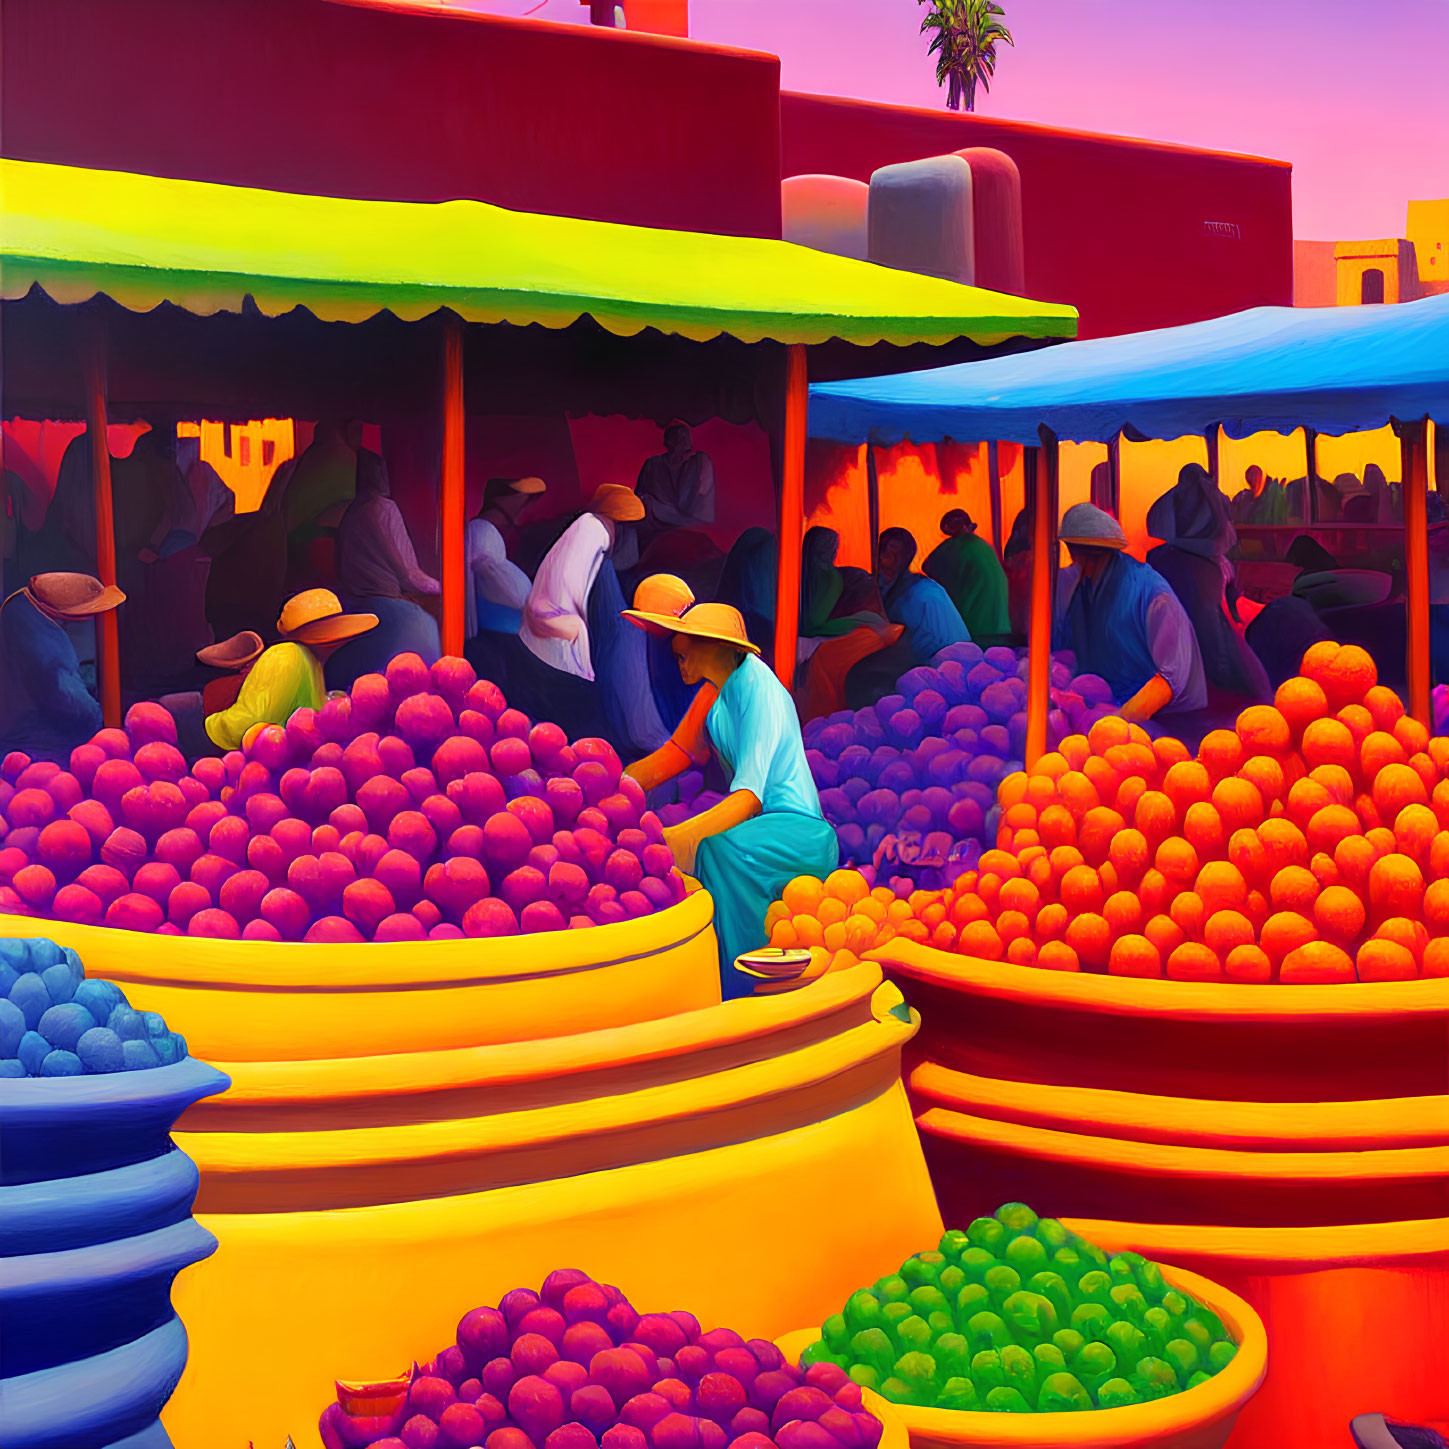 Vibrant market scene with people in hats and colorful fruits.